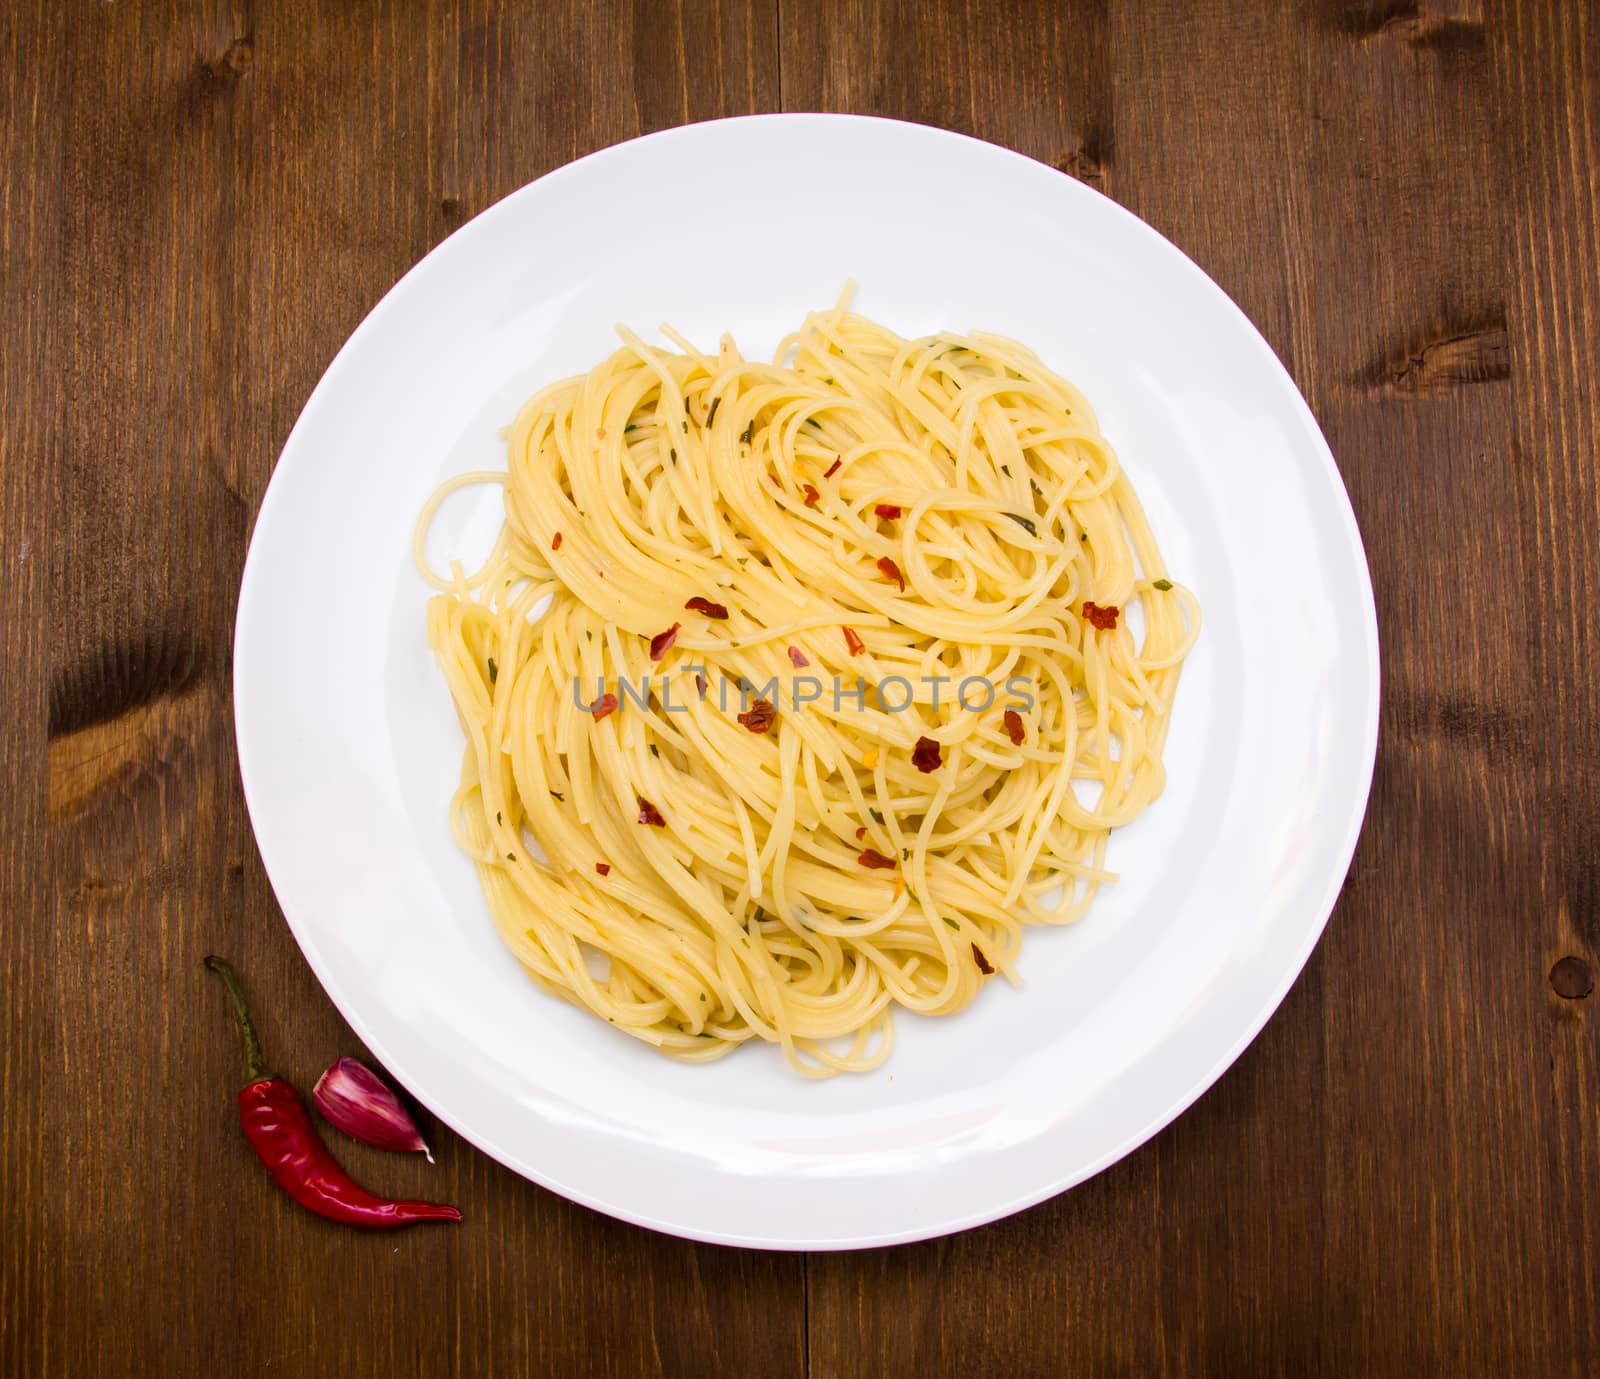 Spaghetti with garlic and chili peppers on wooden top by spafra